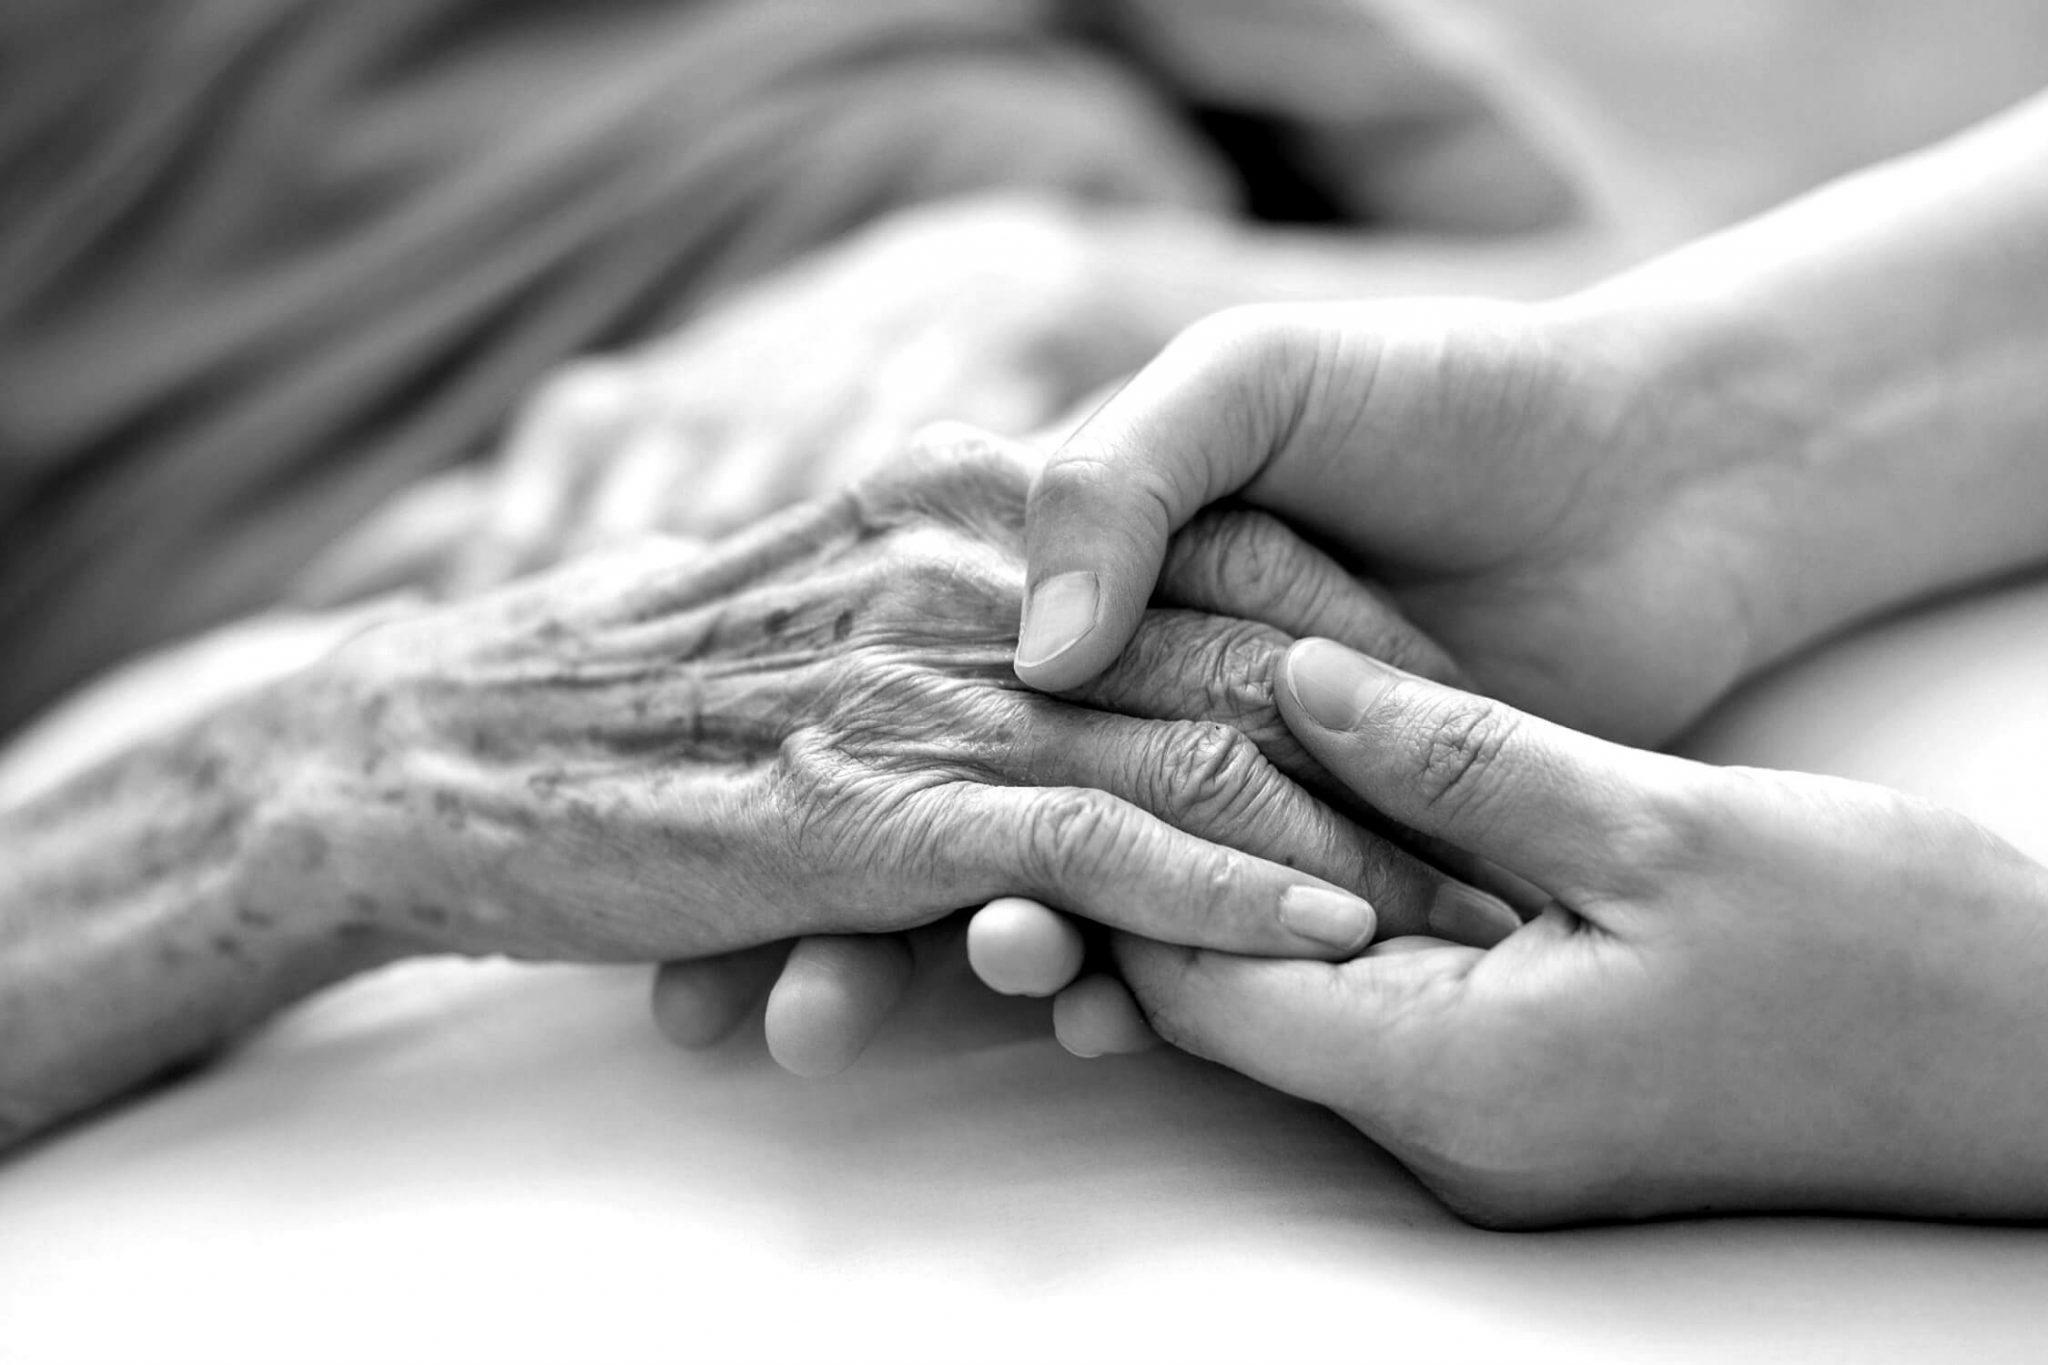 massage-can-help-the-elderly-people-positively-lmg-for-health